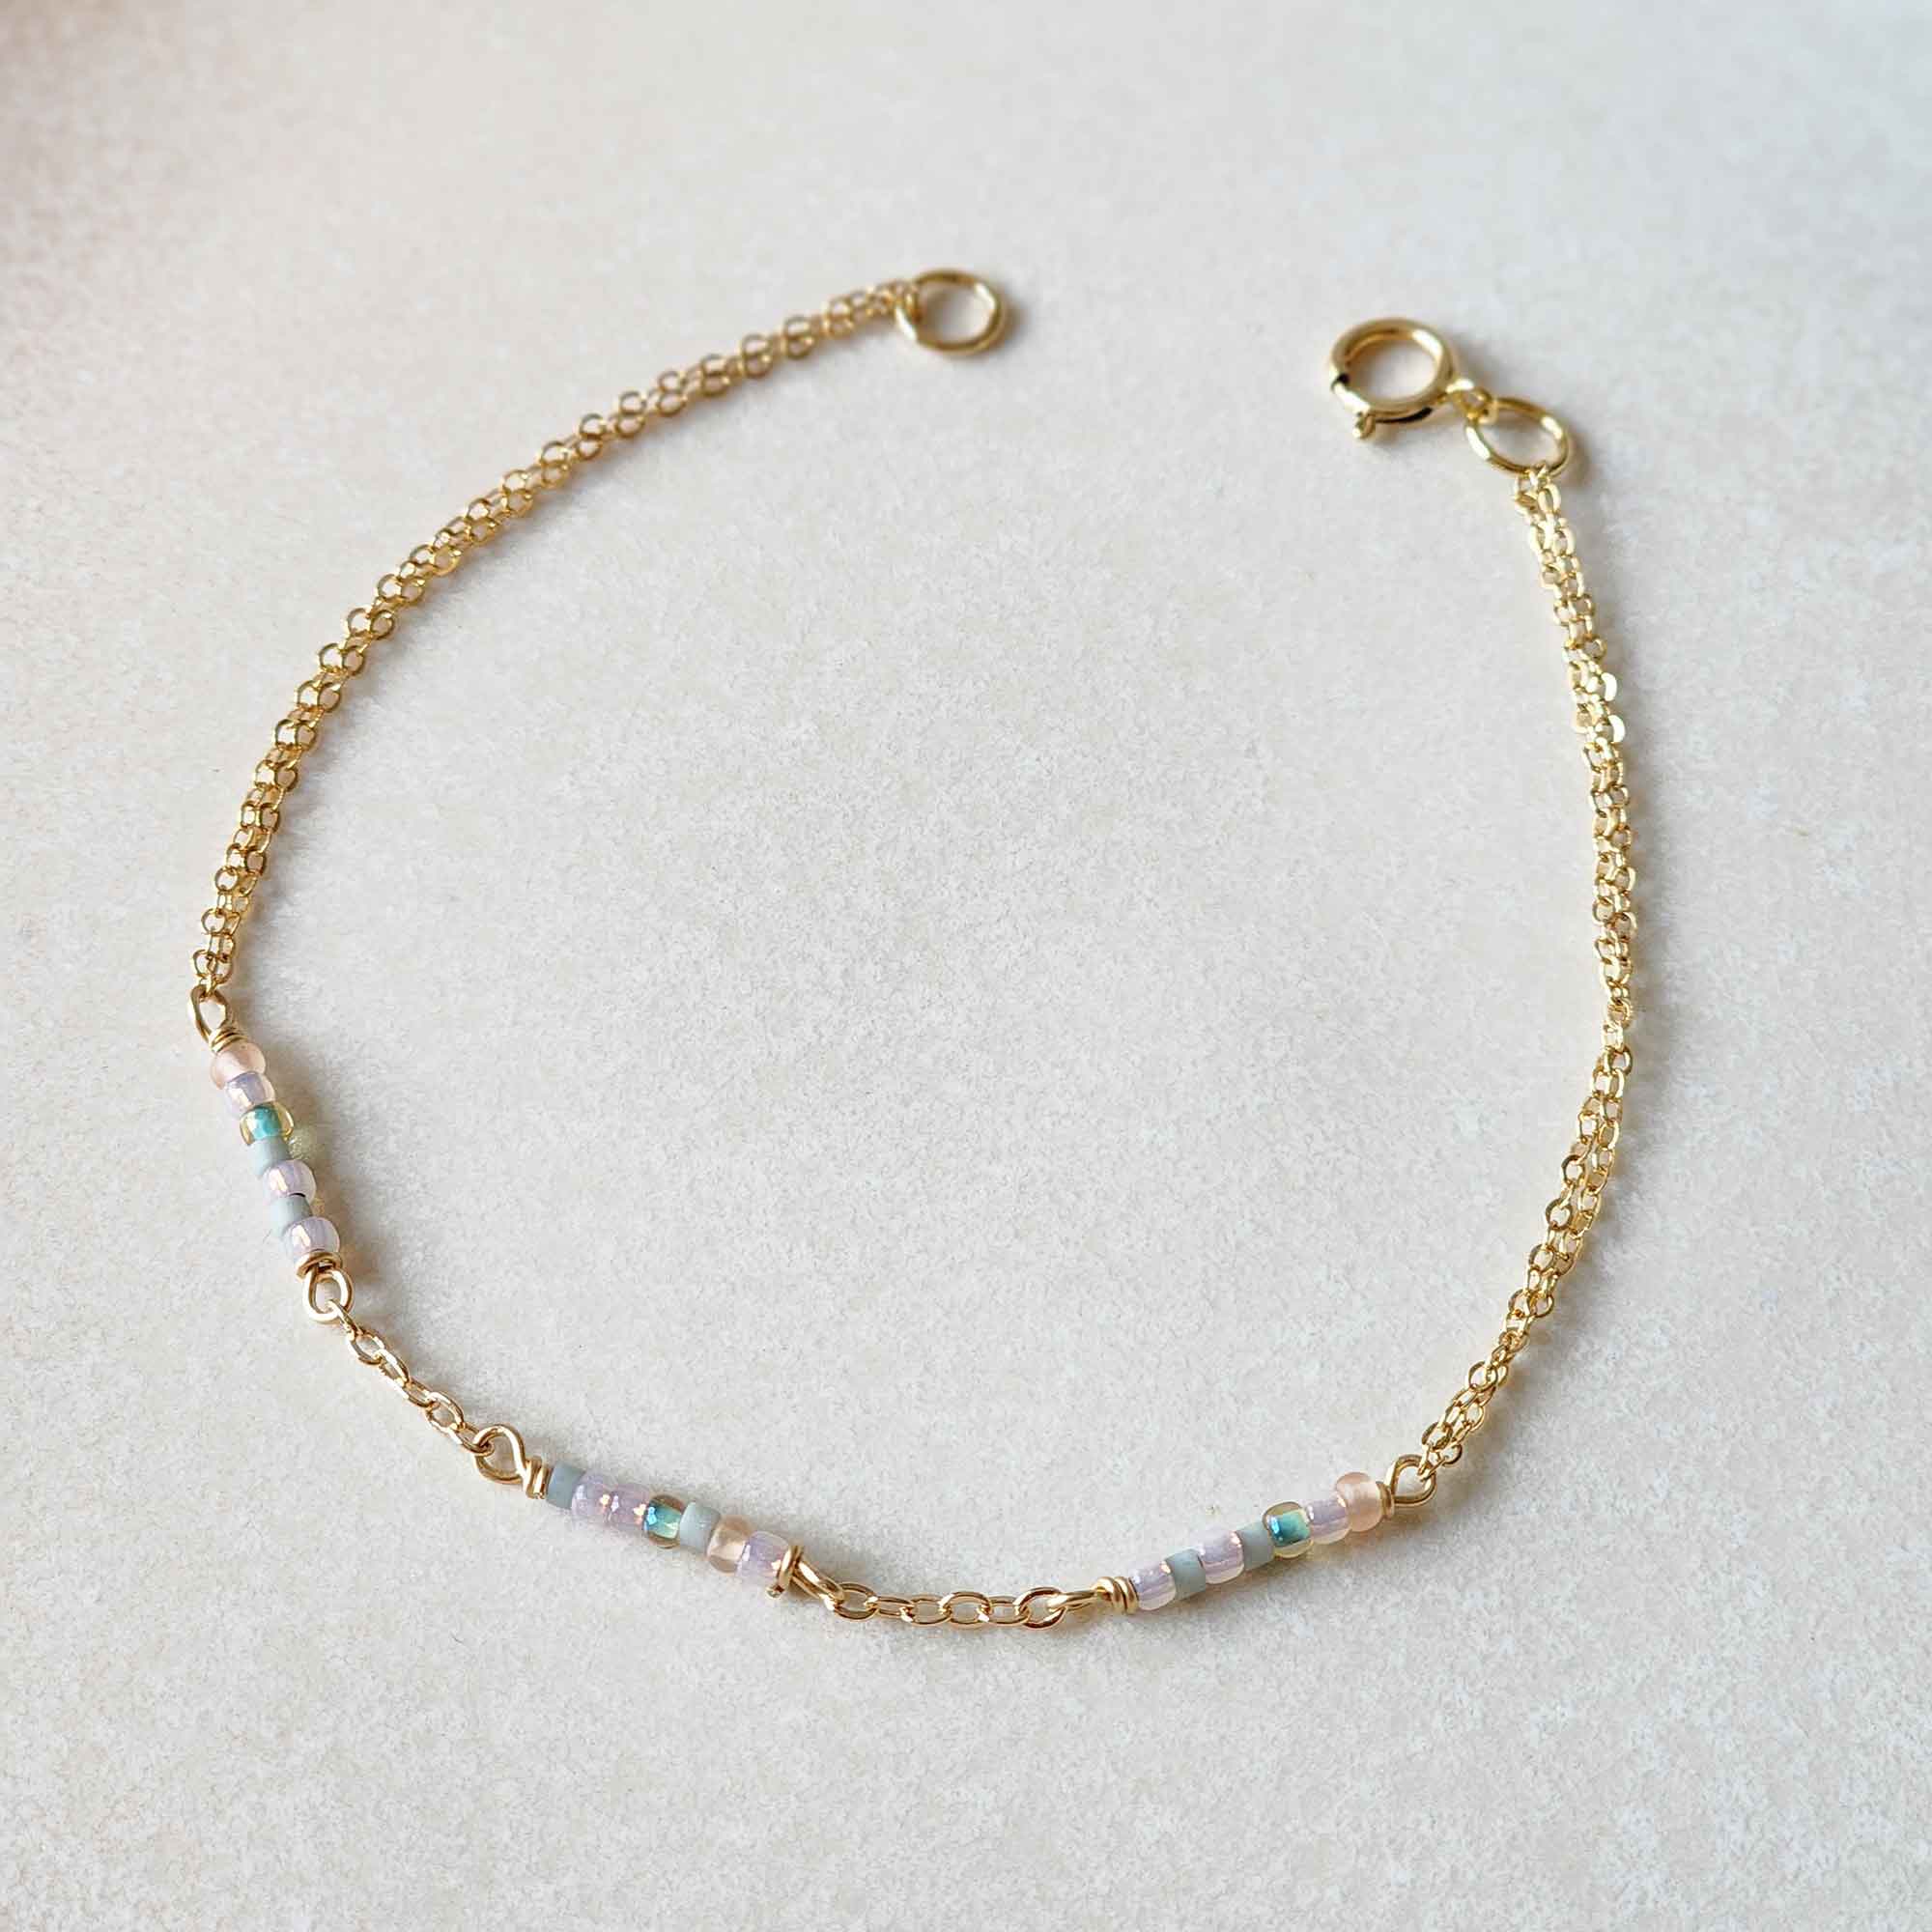 Bracelet micro glass beads and gold filled chains sandrine devost